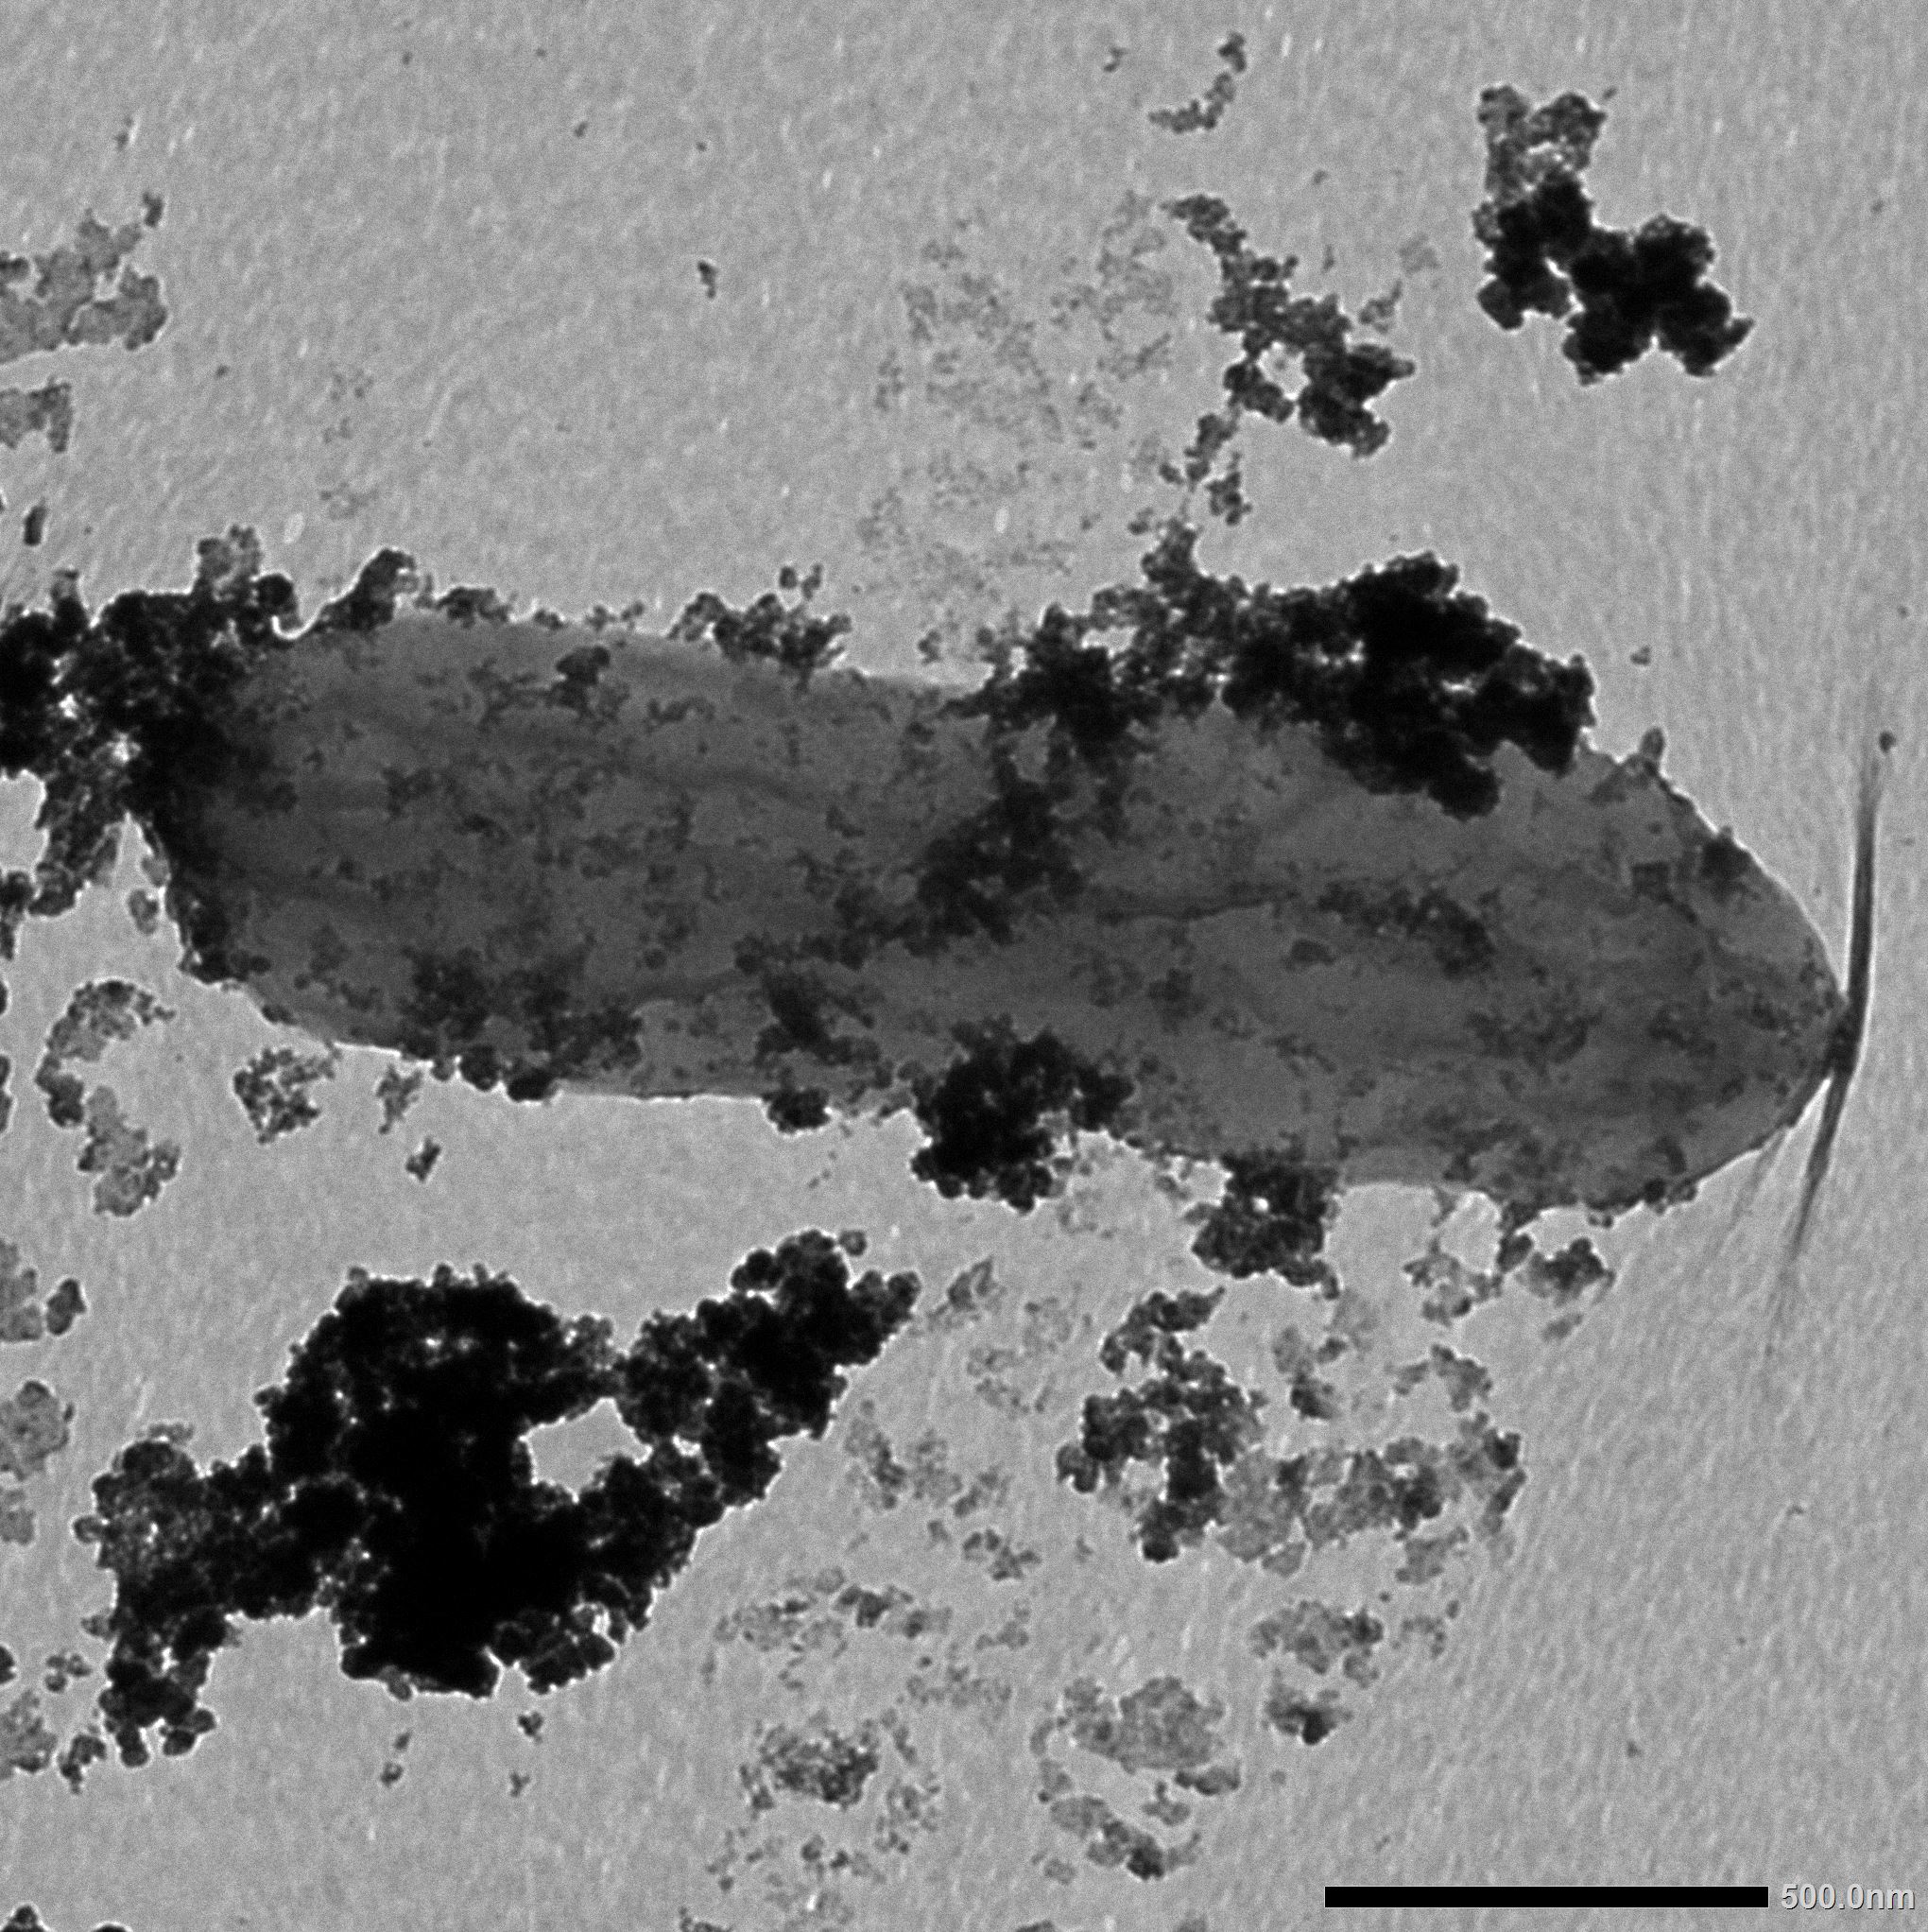 A microscope image shows an oblong, gray bacterial cell coated with clumps of dark speckles, which are mineral particles containing cobalt.